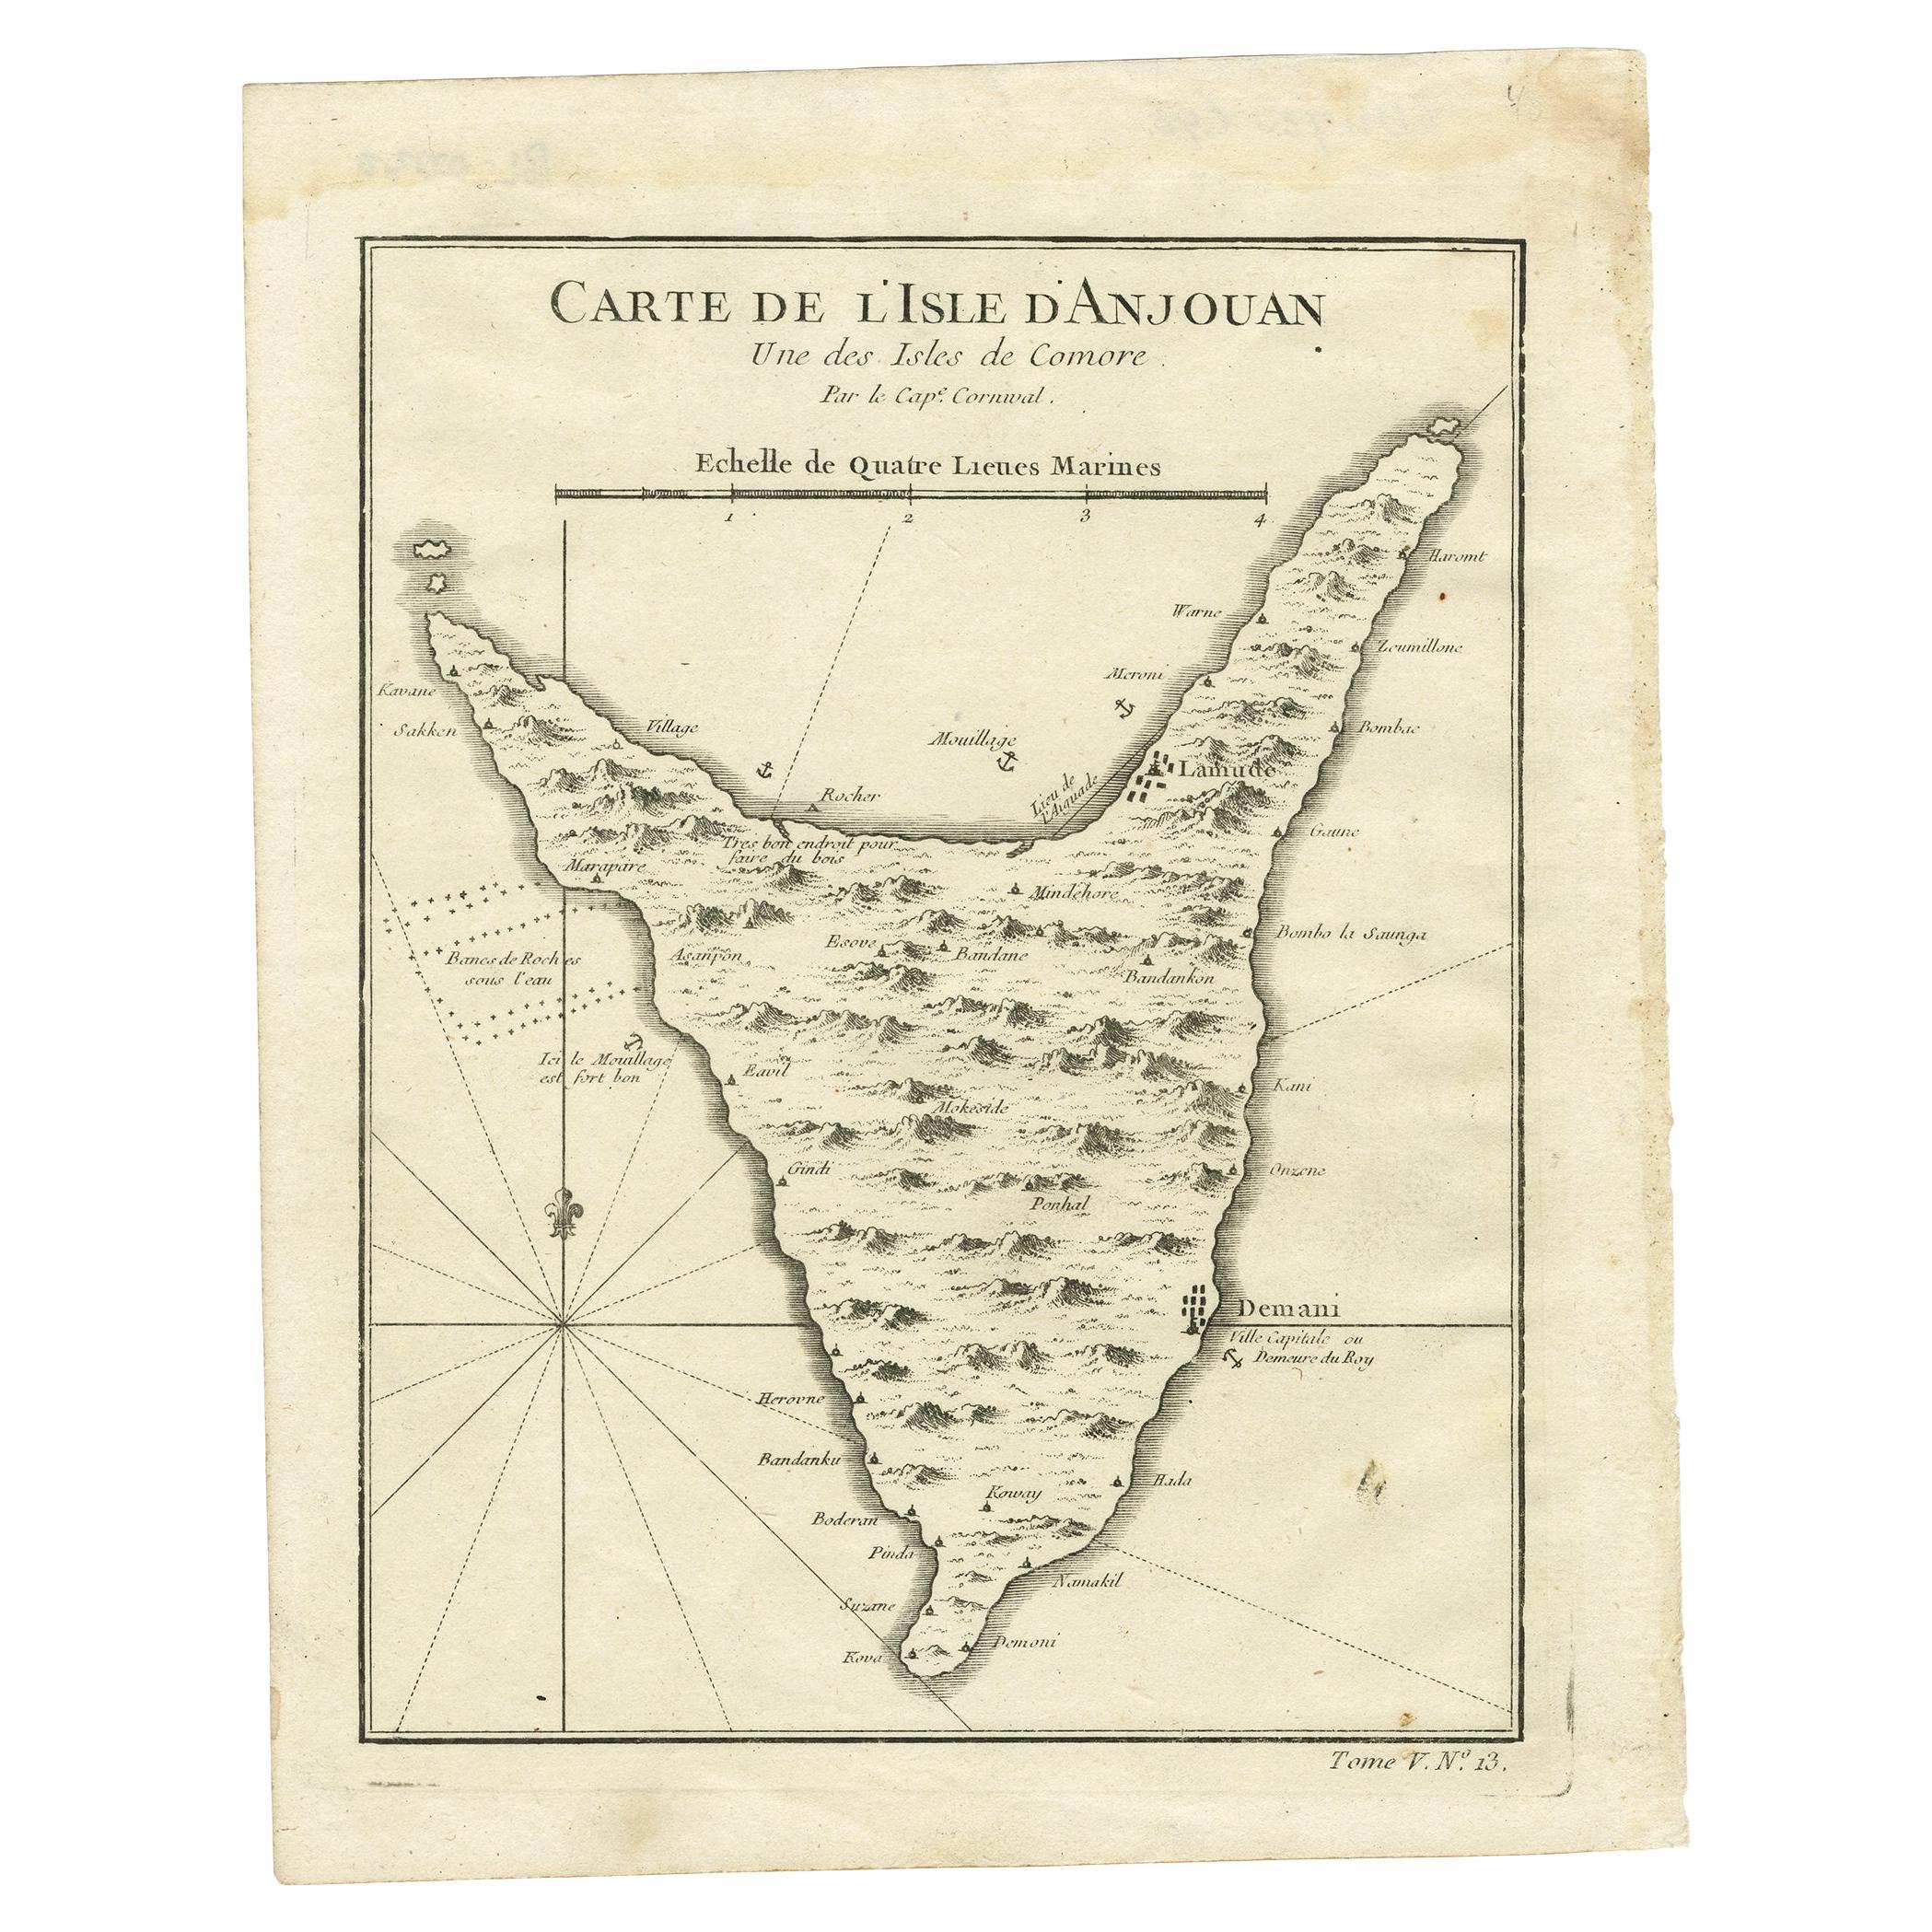 Antique map titled ‘Carte de L’Isle D’Anjouan’. Original antique map of Anjouan, also known as Ndzuwani or Nzwani, or, historically, as Johanna, an autonomous island in the Indian Ocean that forms part of the Union of the Comoros. This map